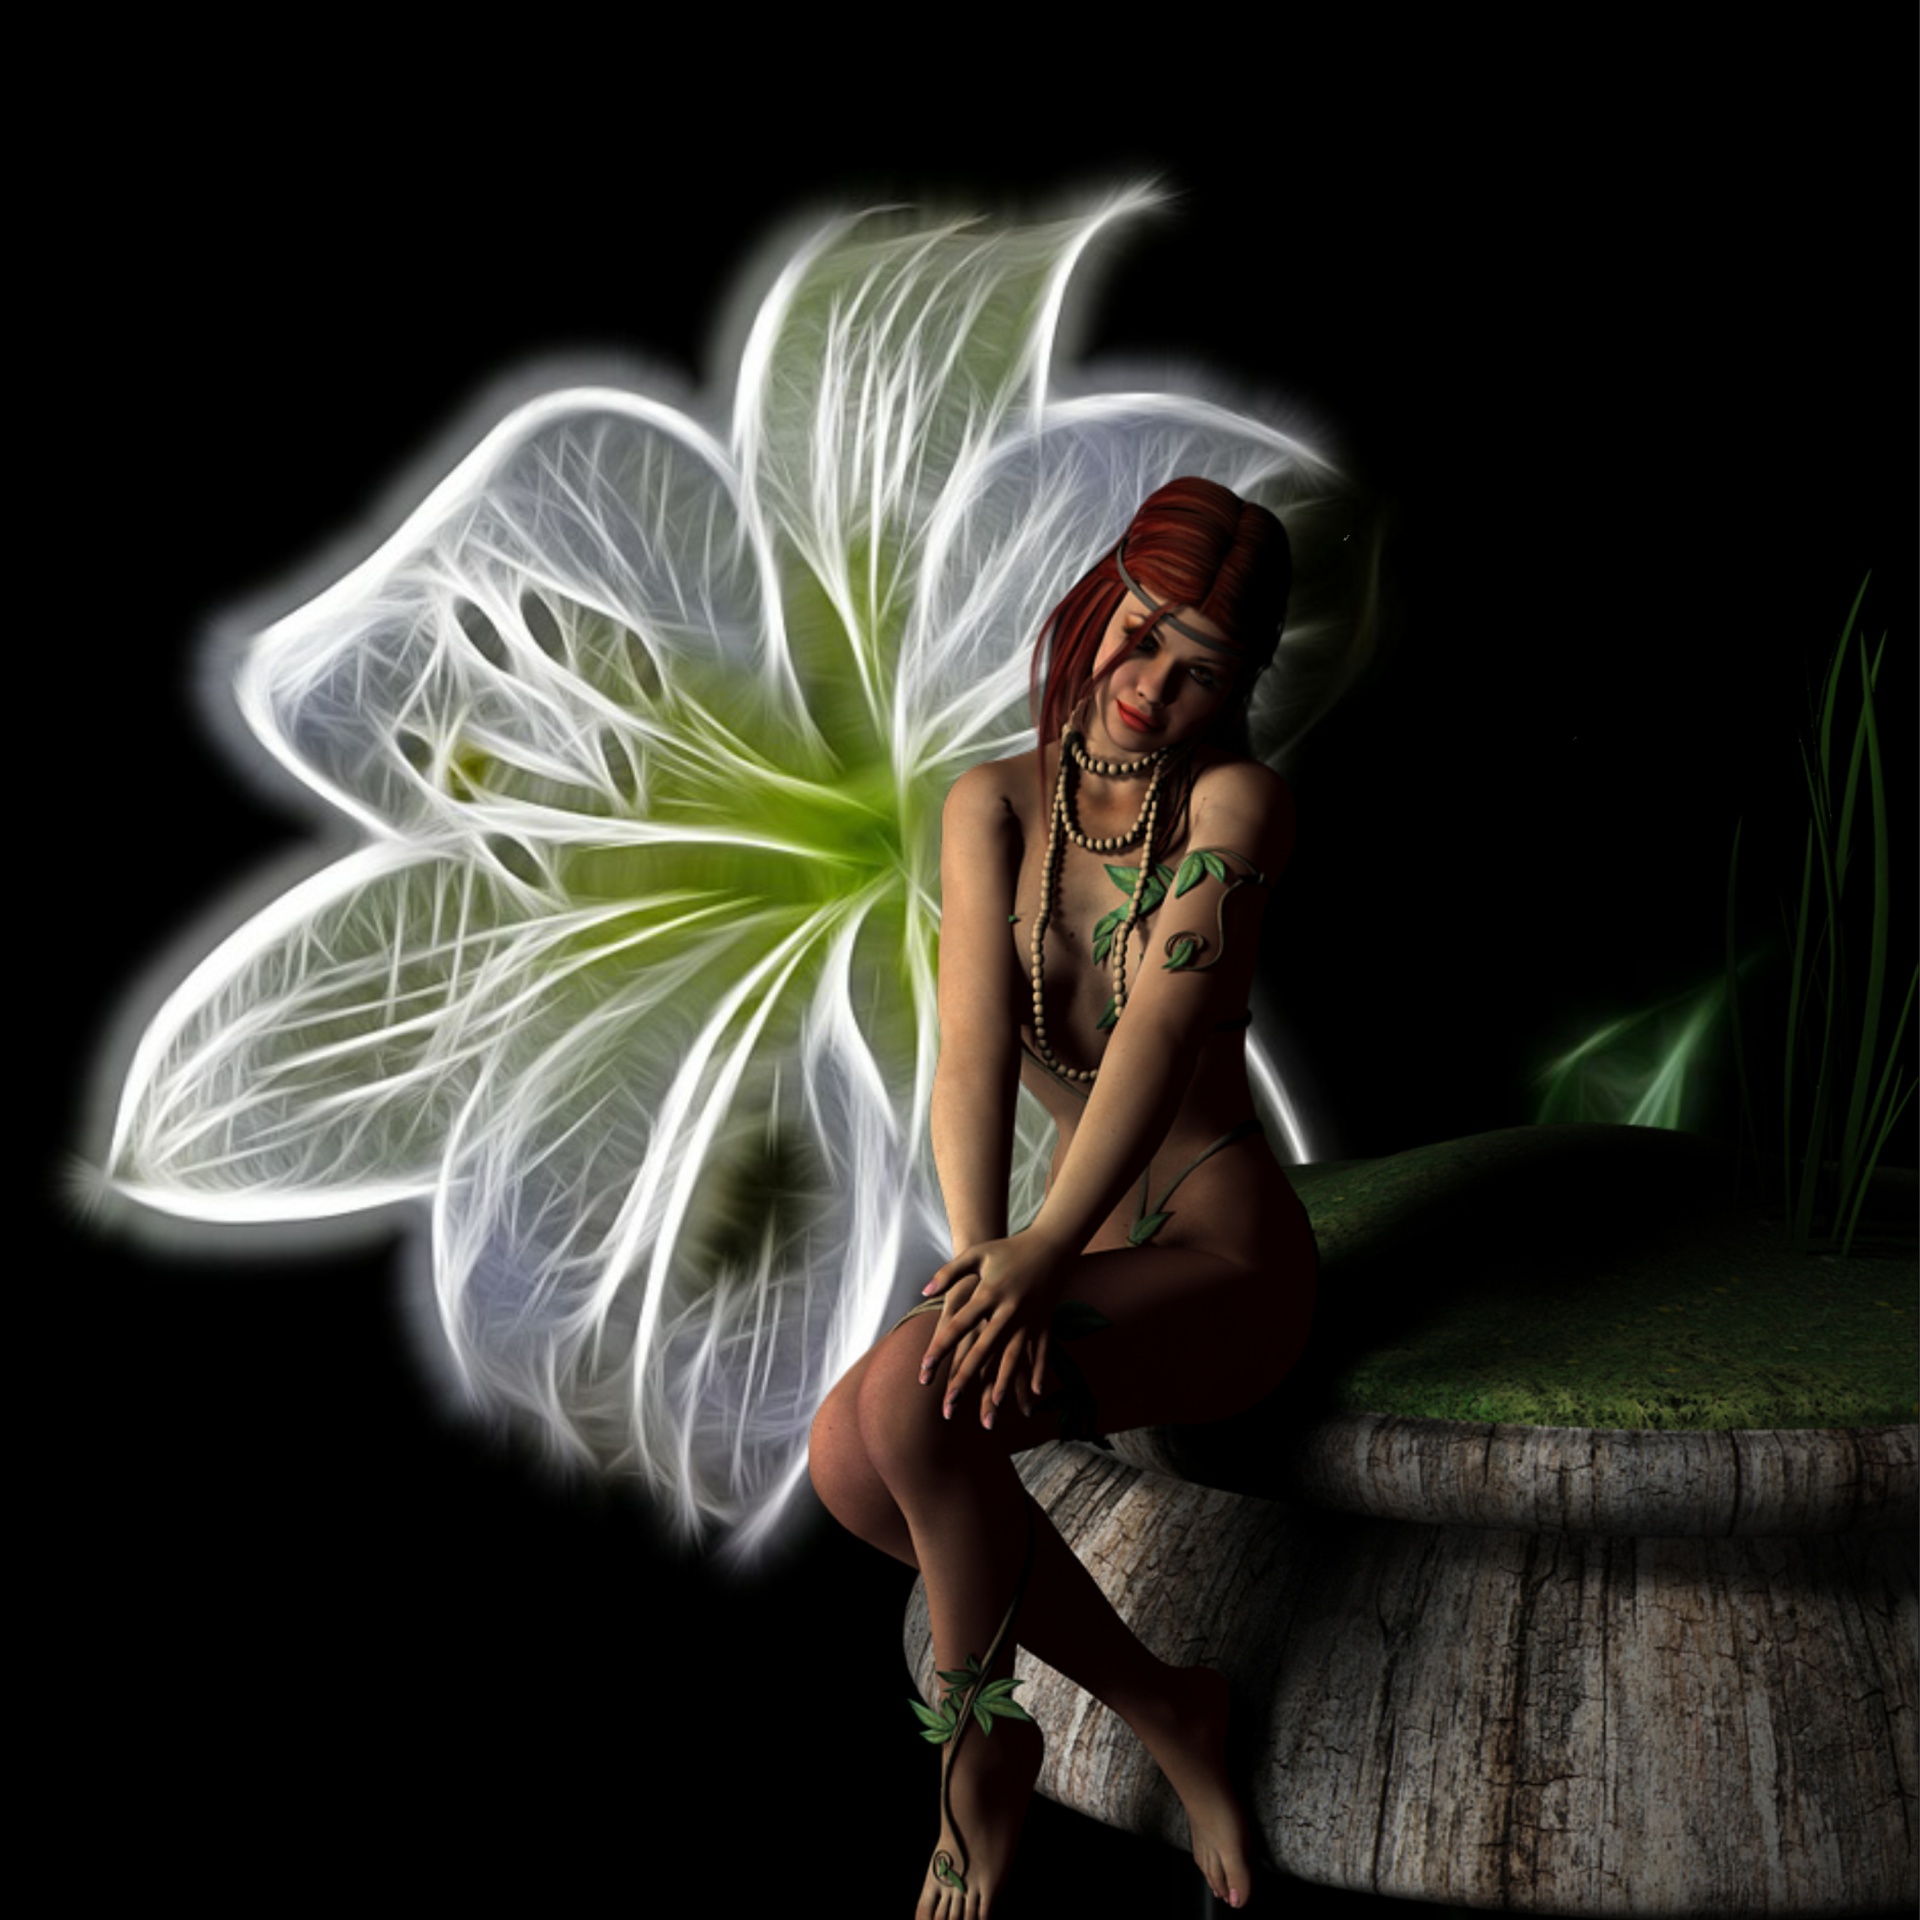 Faerie and flower depiction